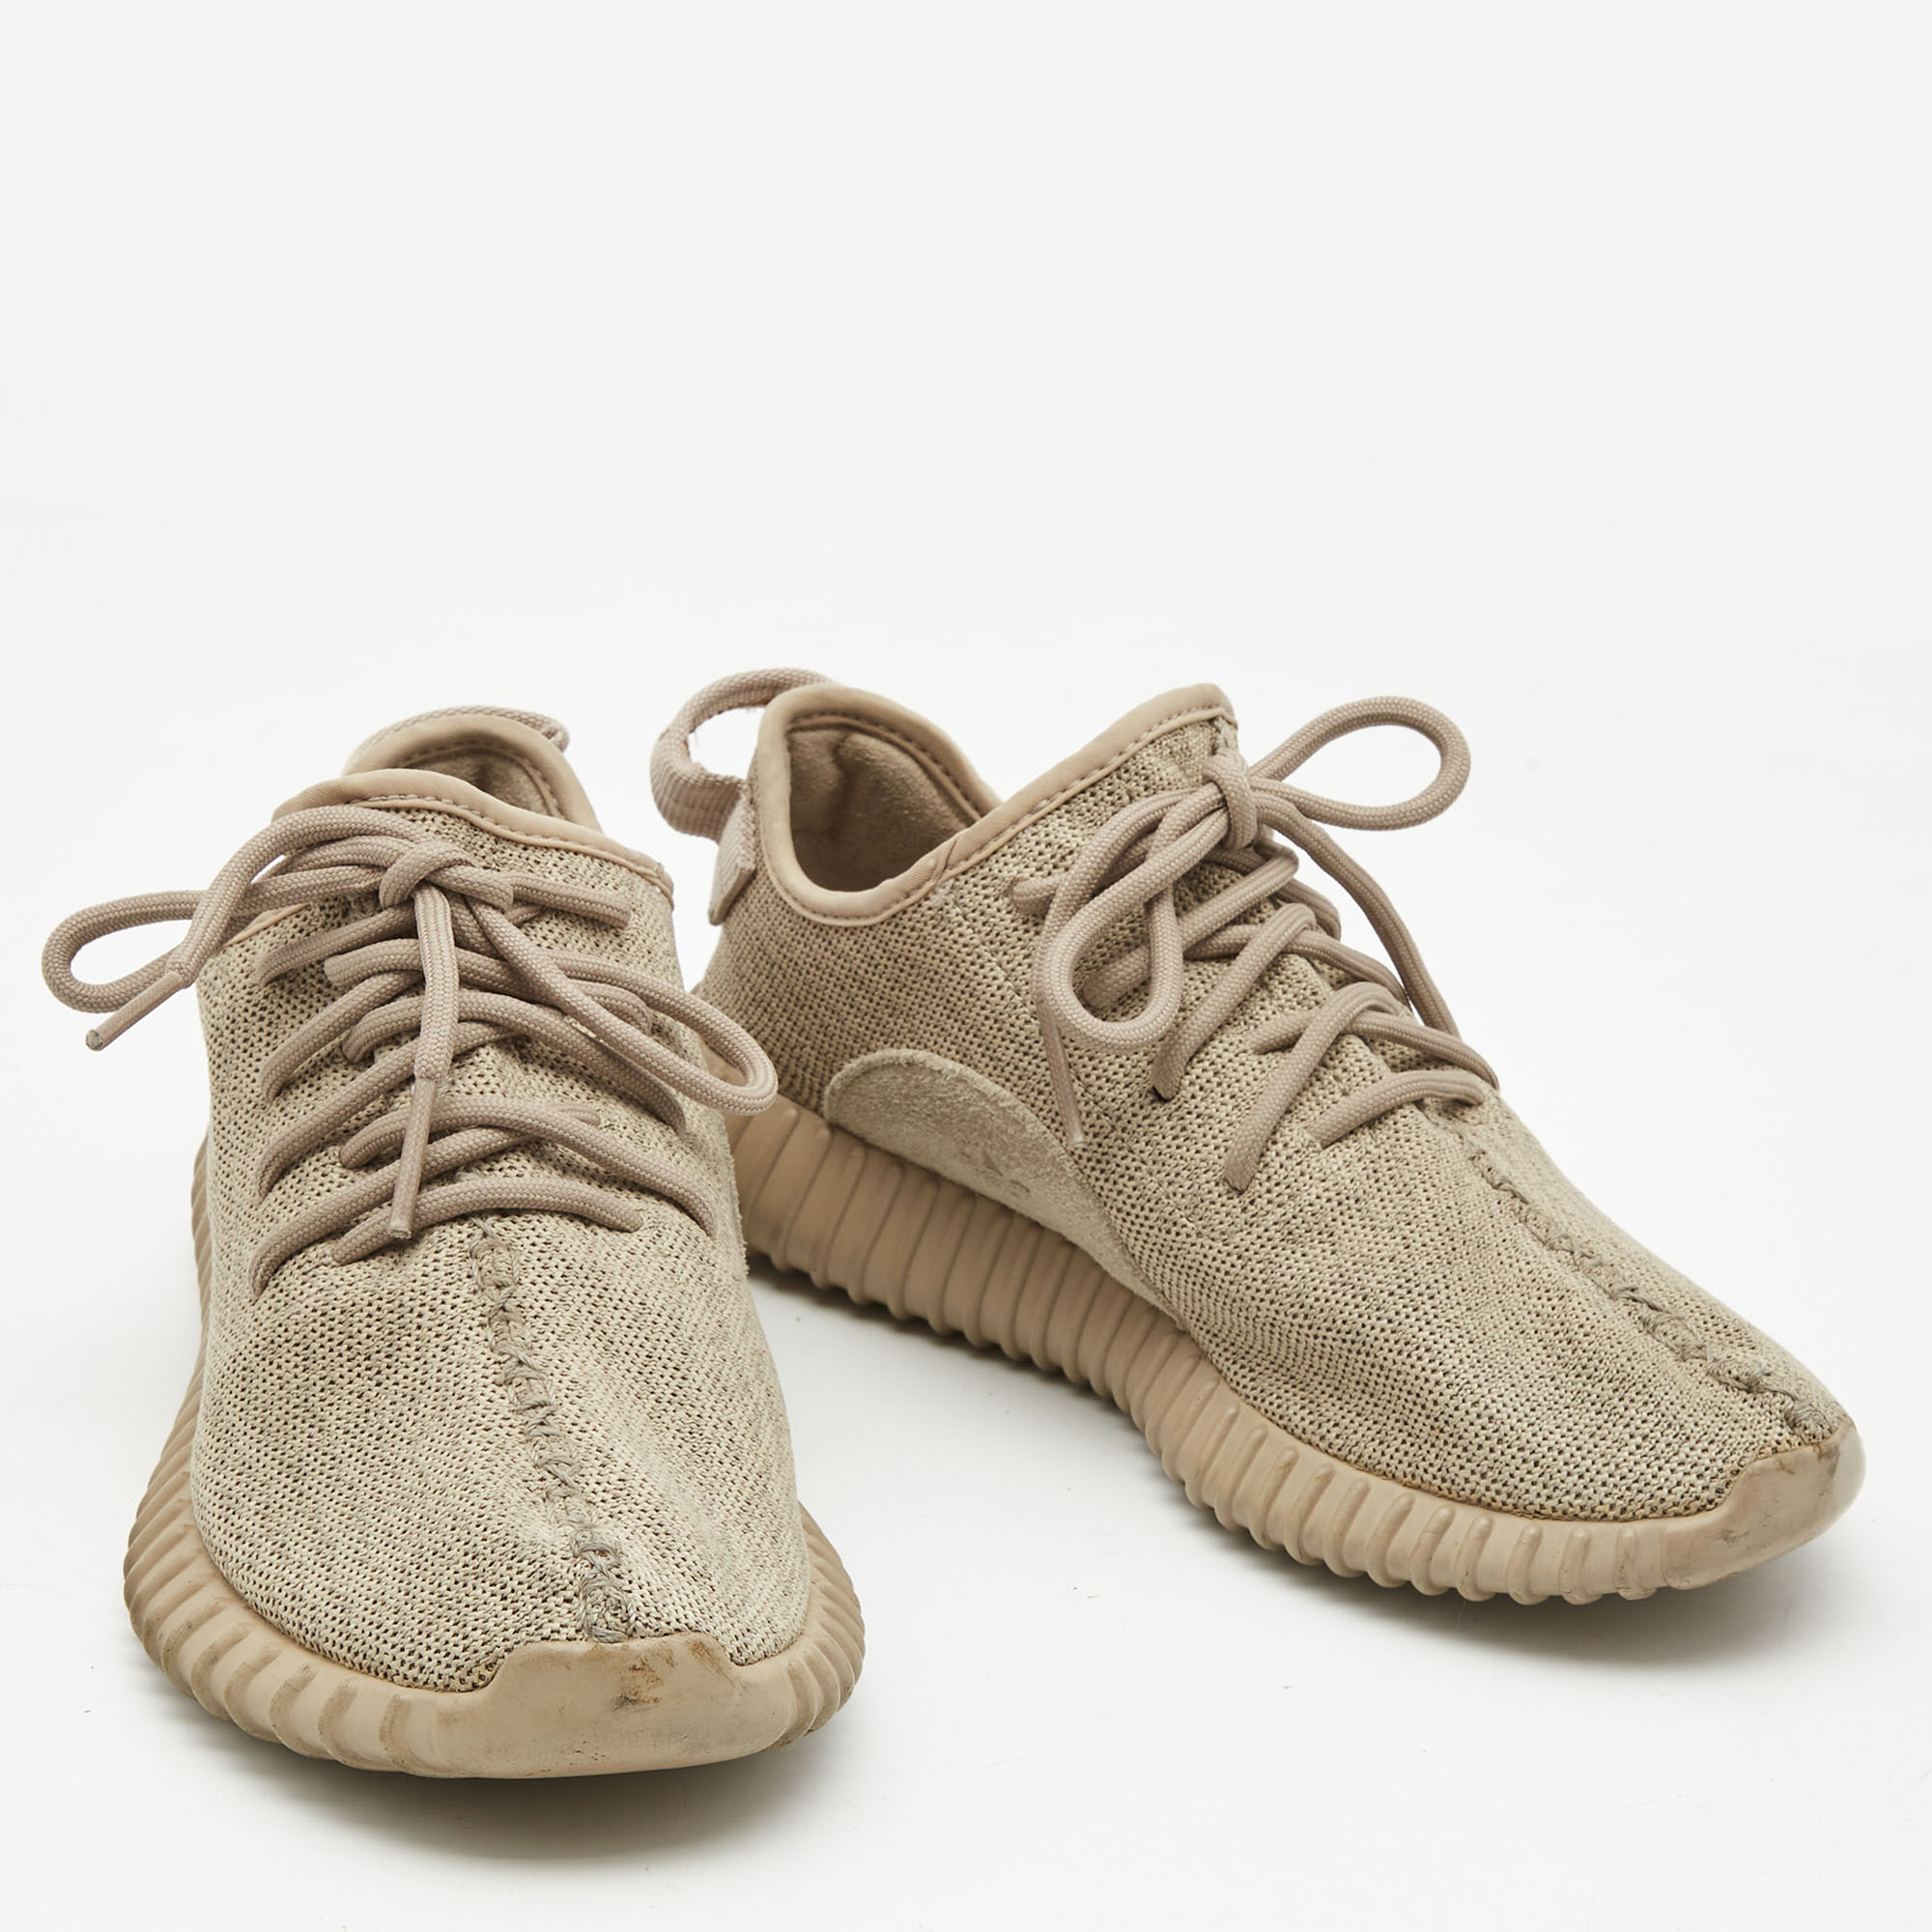 Yeezy X Adidas Beige Knit Fabric Boost 350 V2 Oxford Tan Sneakers Size 39 1/3